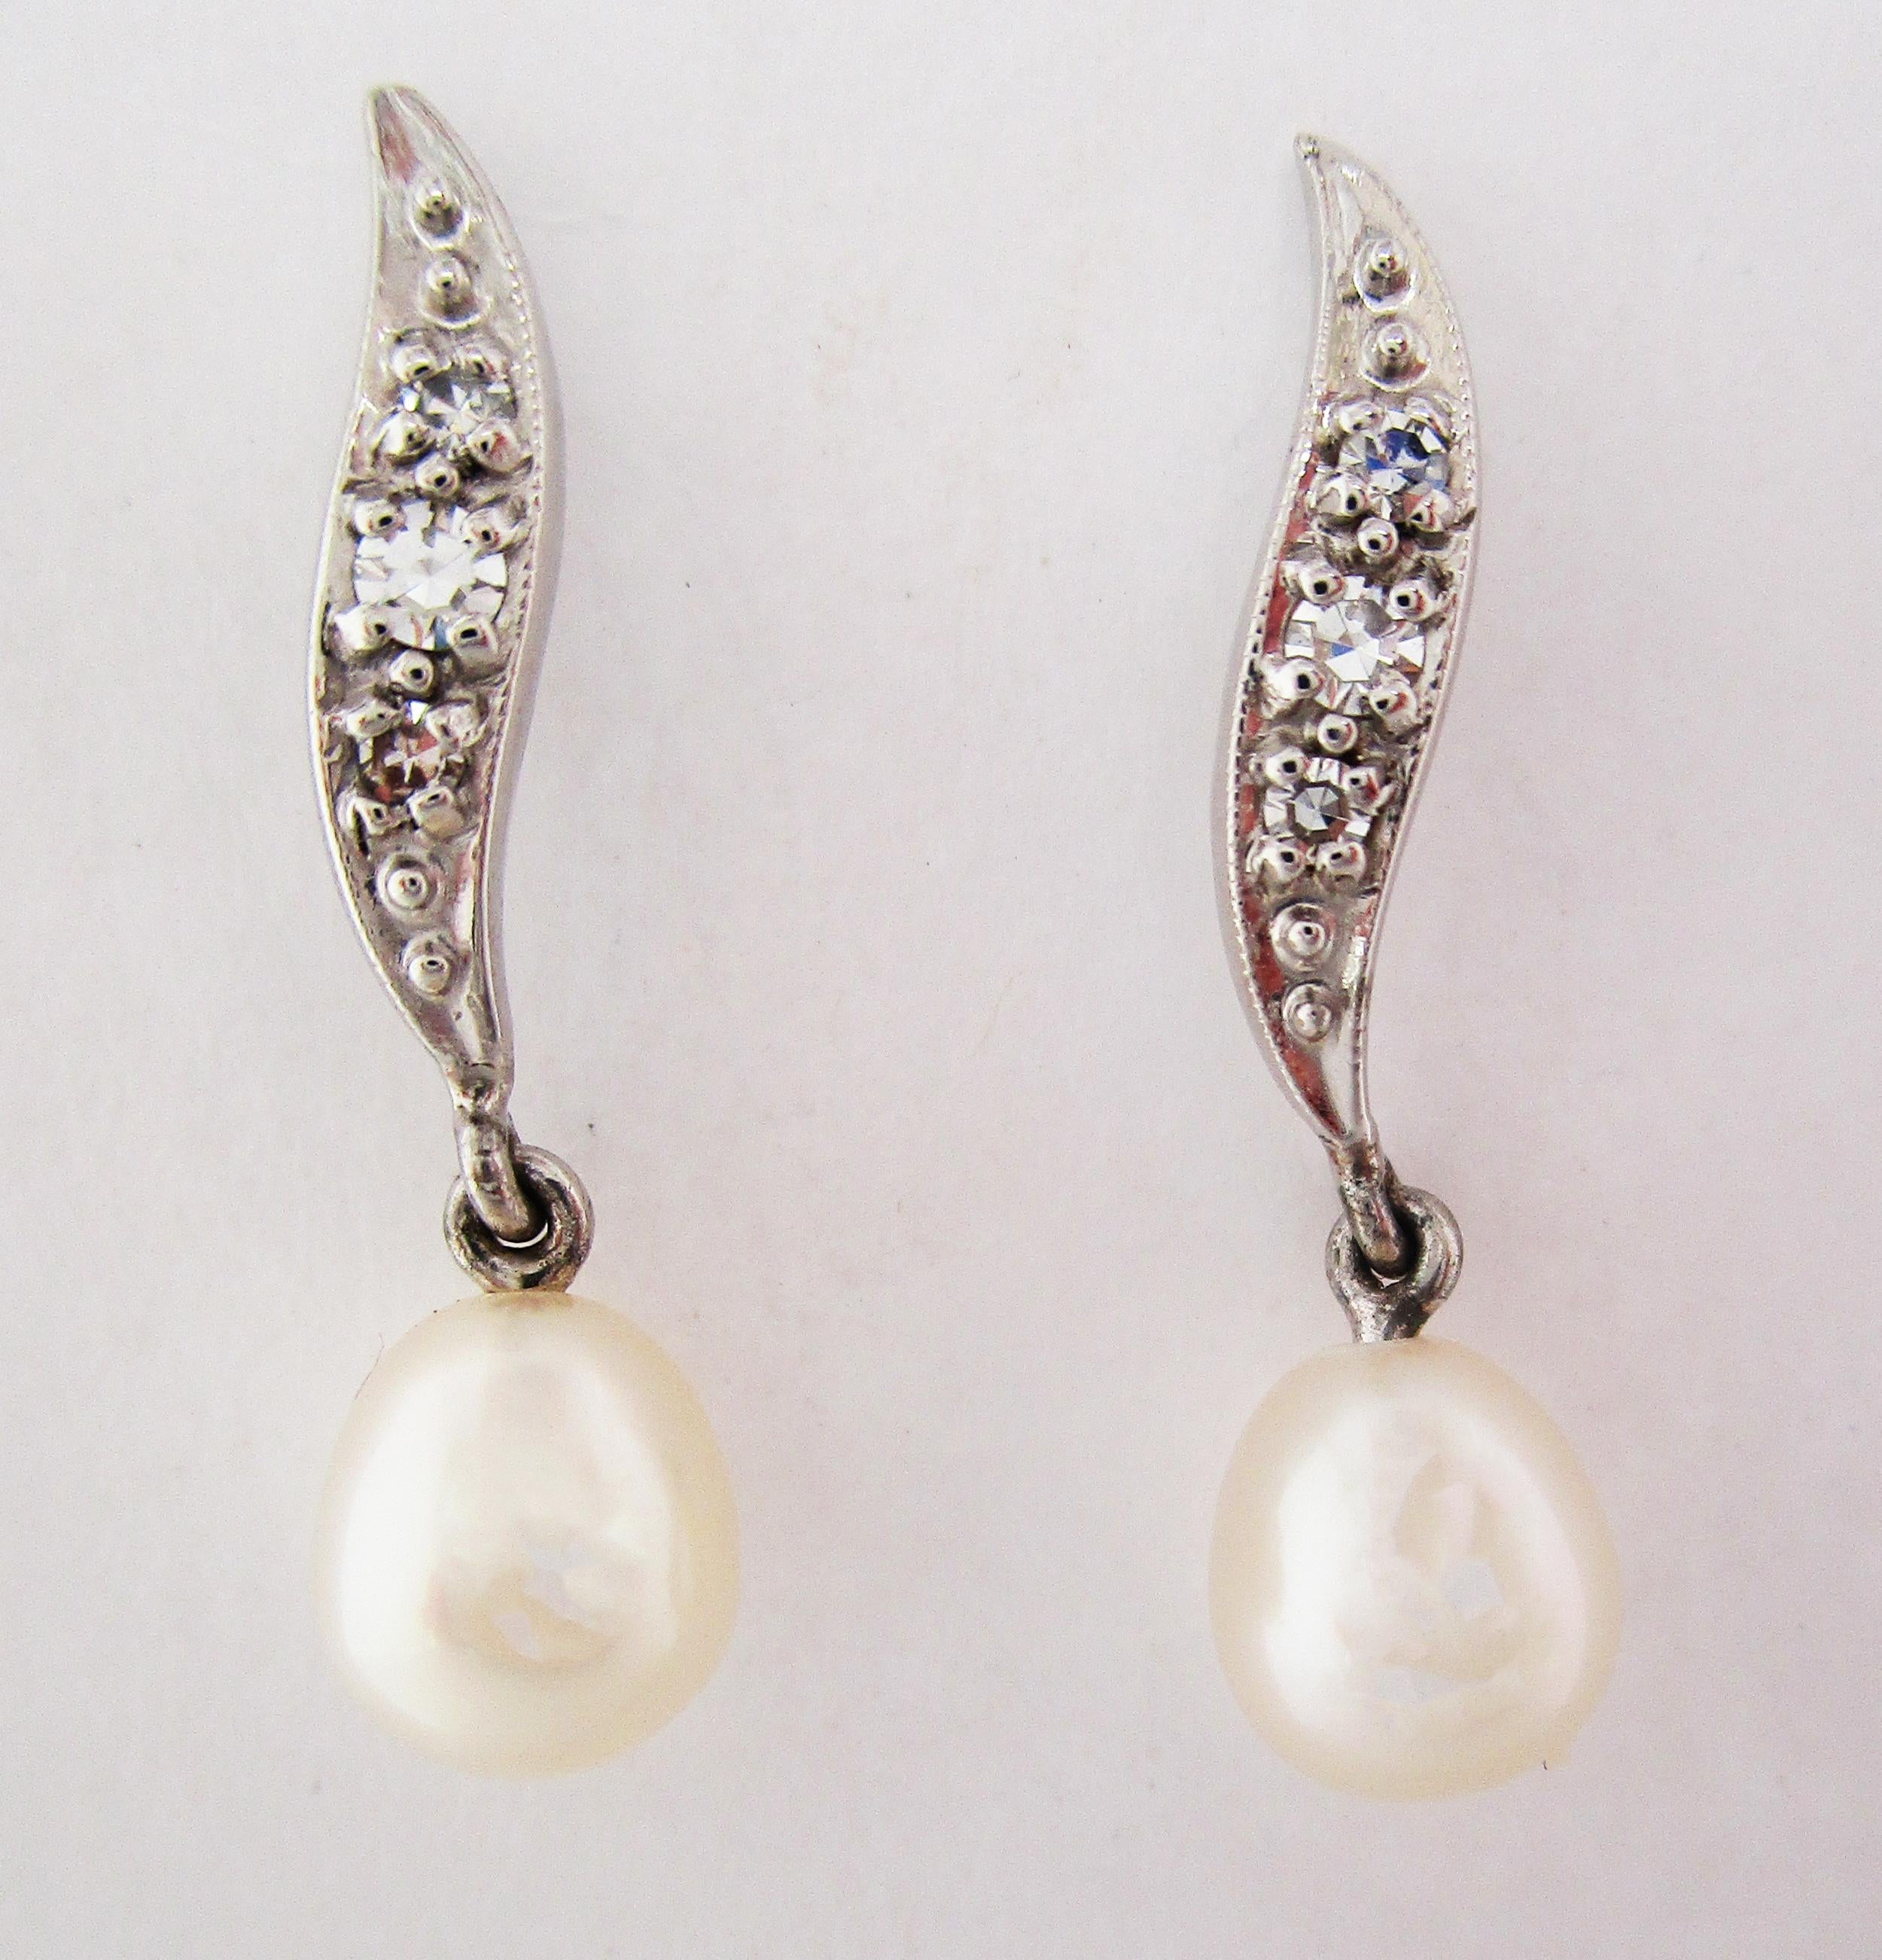 These elegant mid-century earrings are in bright 14k white gold and feature a curved top portion set with three diamonds and finished by an articulated pearl drop. The style of these earrings defines the 40s and 50s. The combination of white gold,